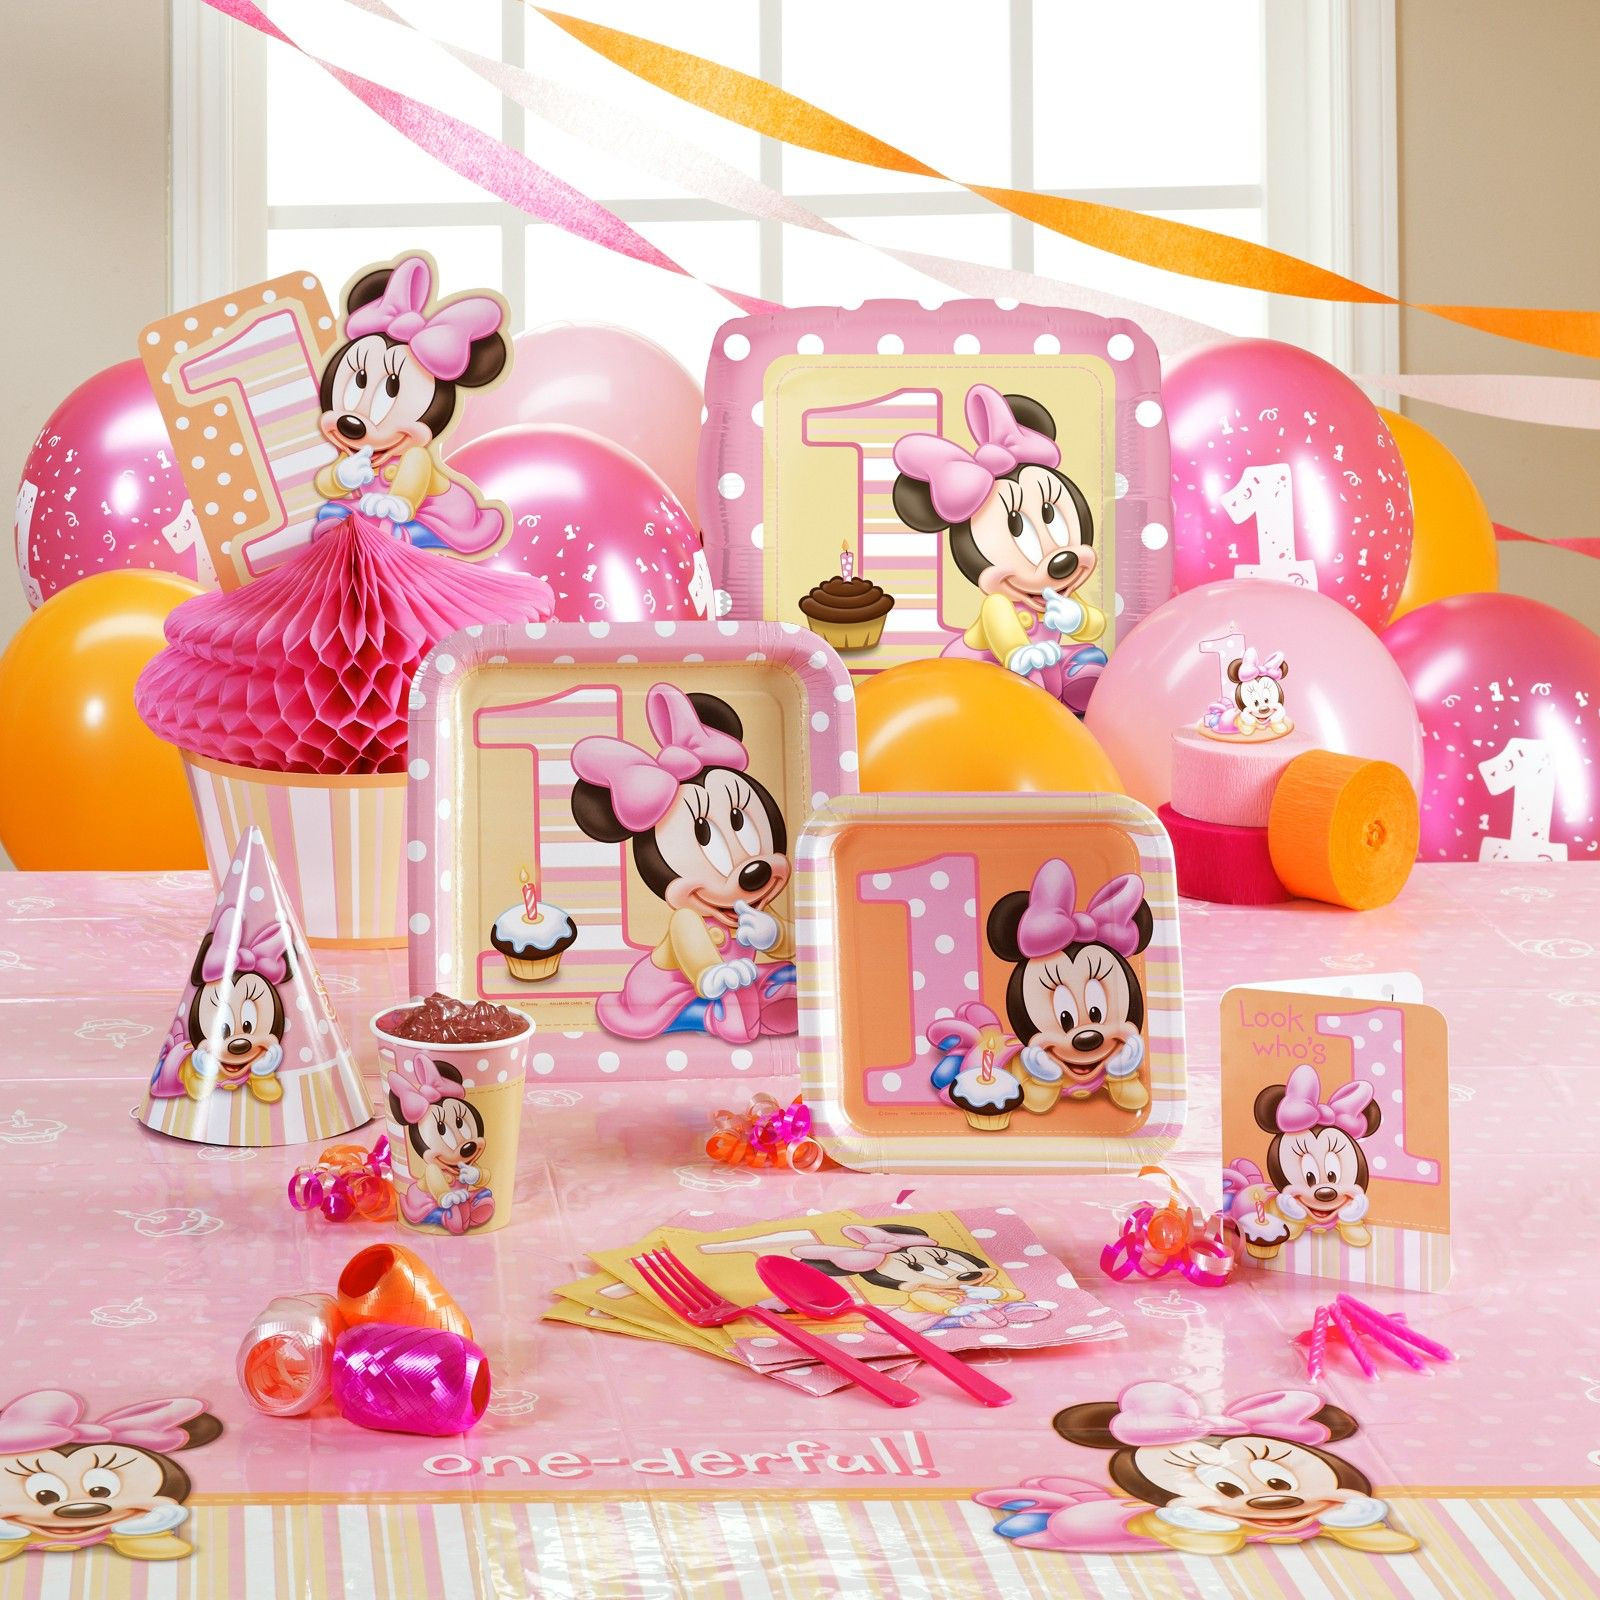 Baby Minnie Mouse 1St Birthday Party Supplies
 Disney Minnie s 1st Birthday Party Supplies